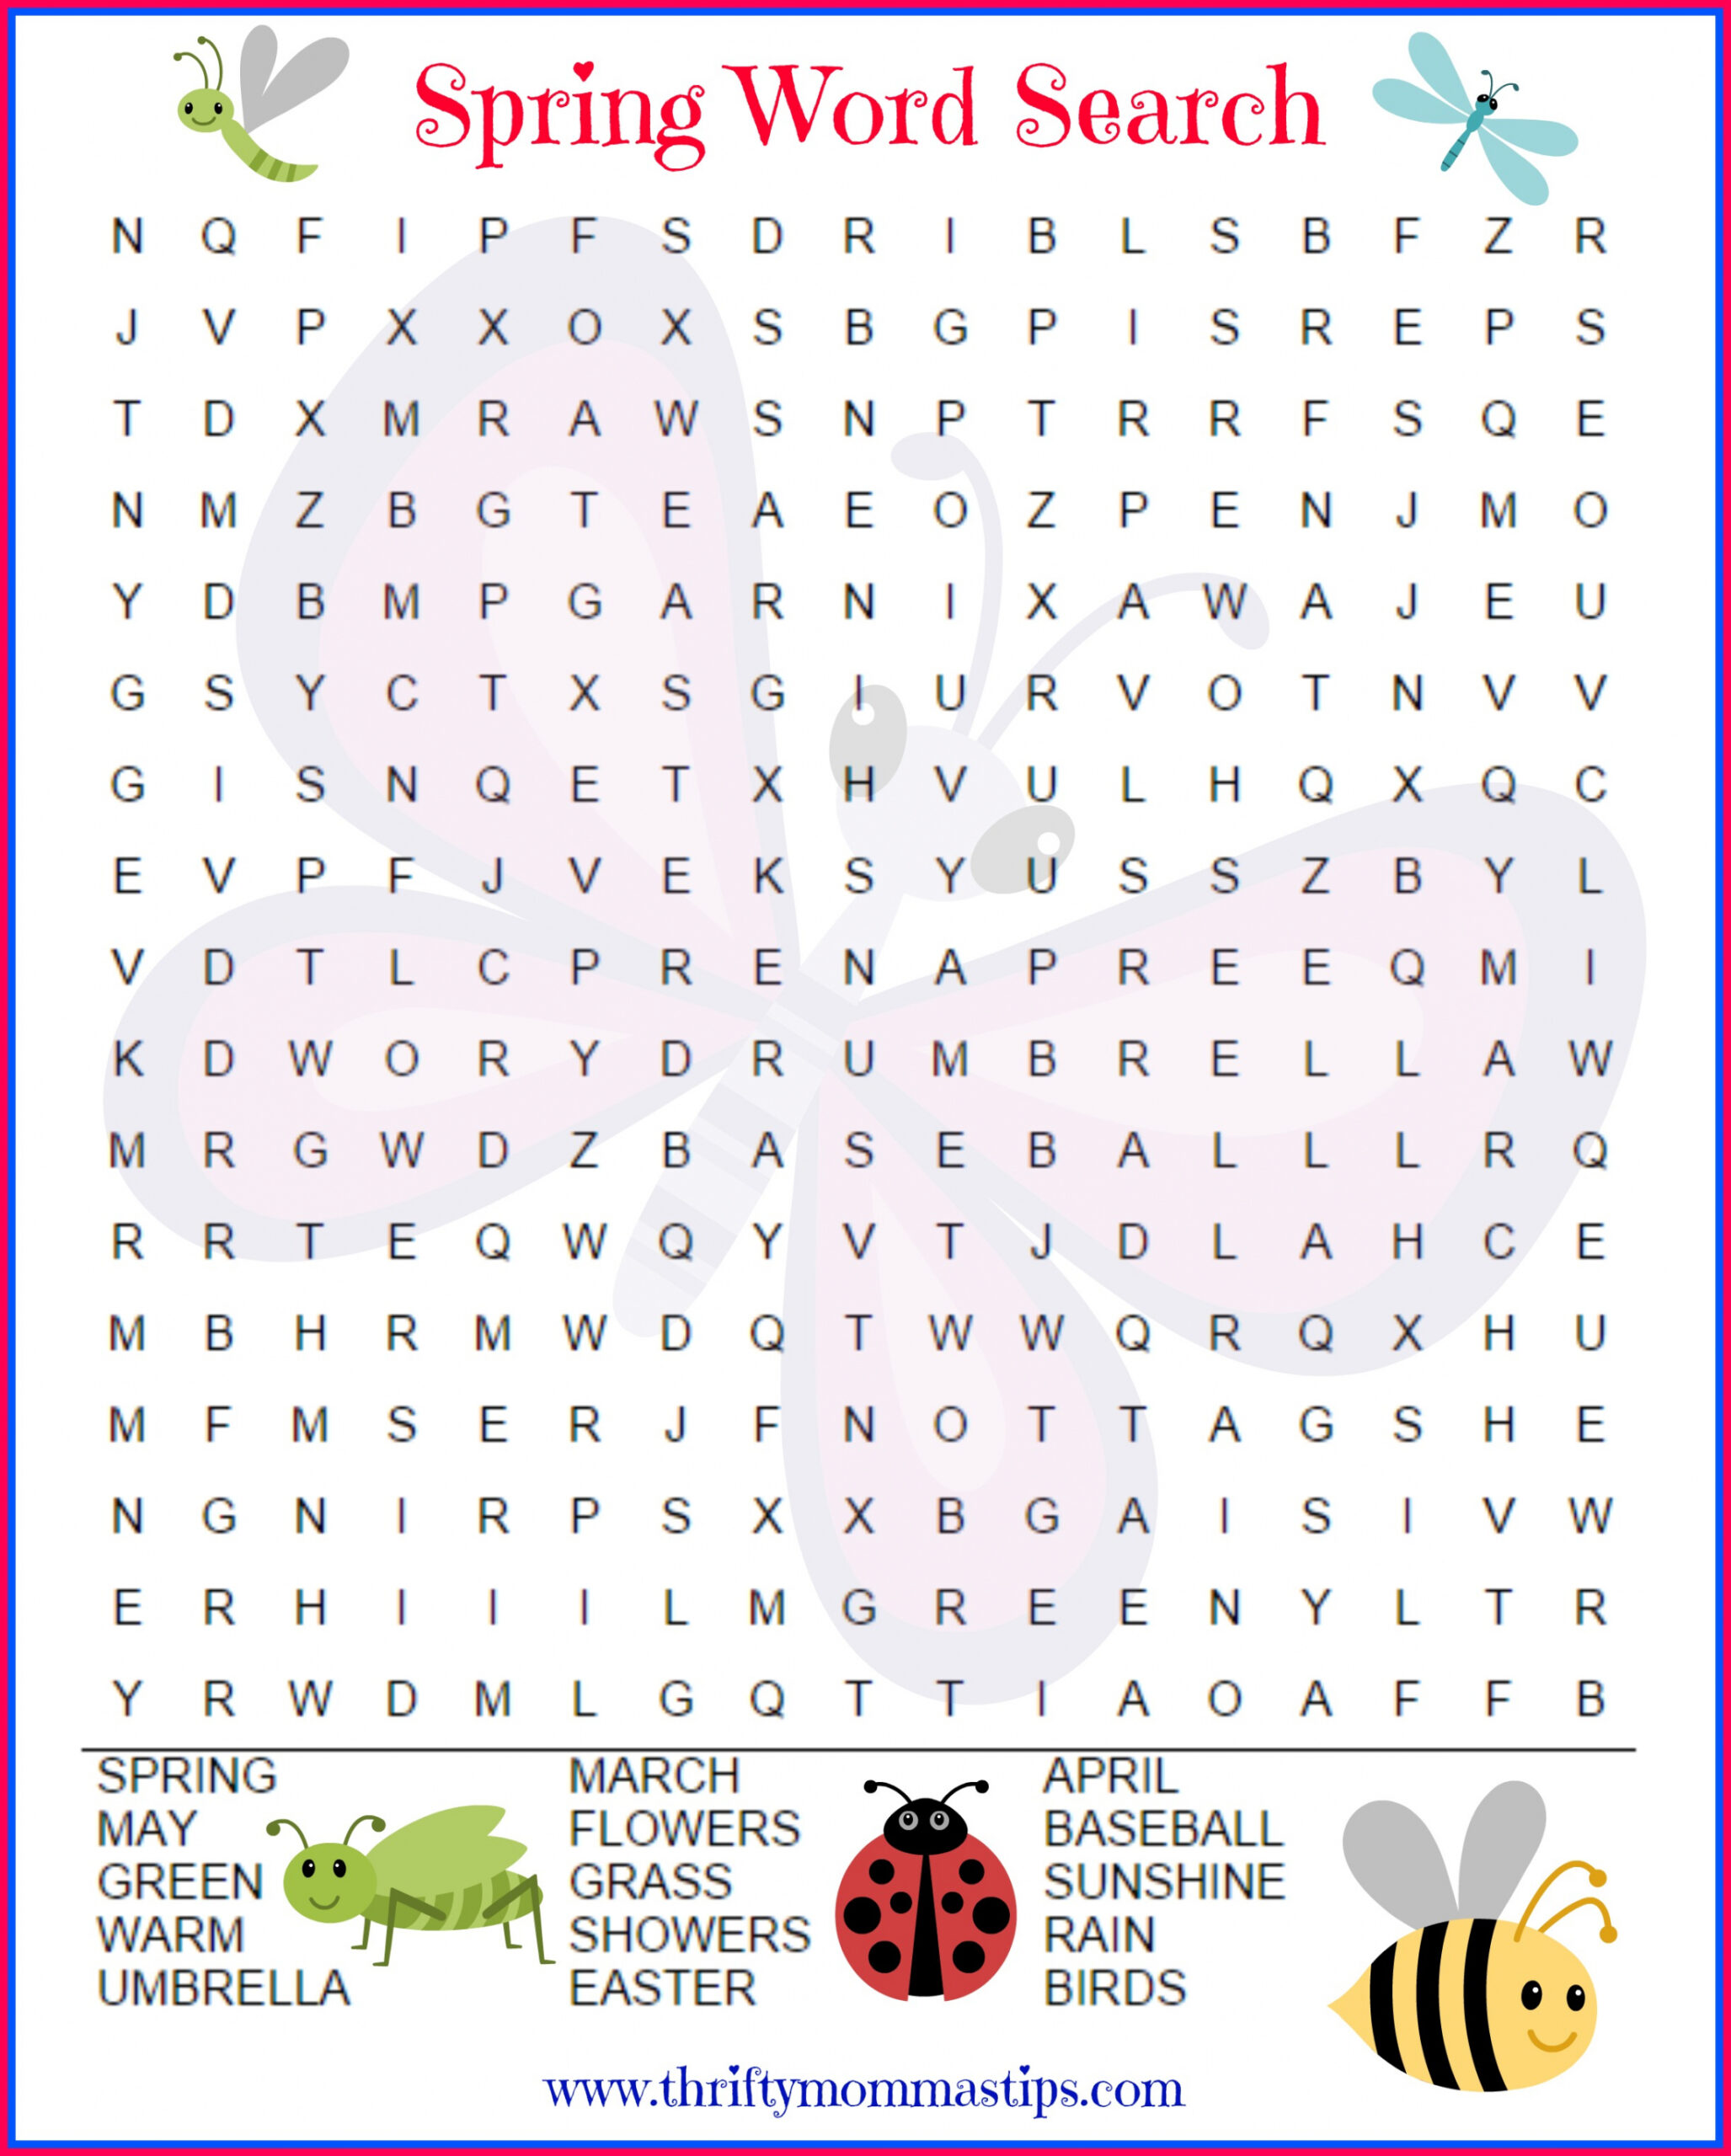 Free Printable Spring Word Search - Printable - Fun Spring Word Search for Kids - Thrifty Mommas Tips